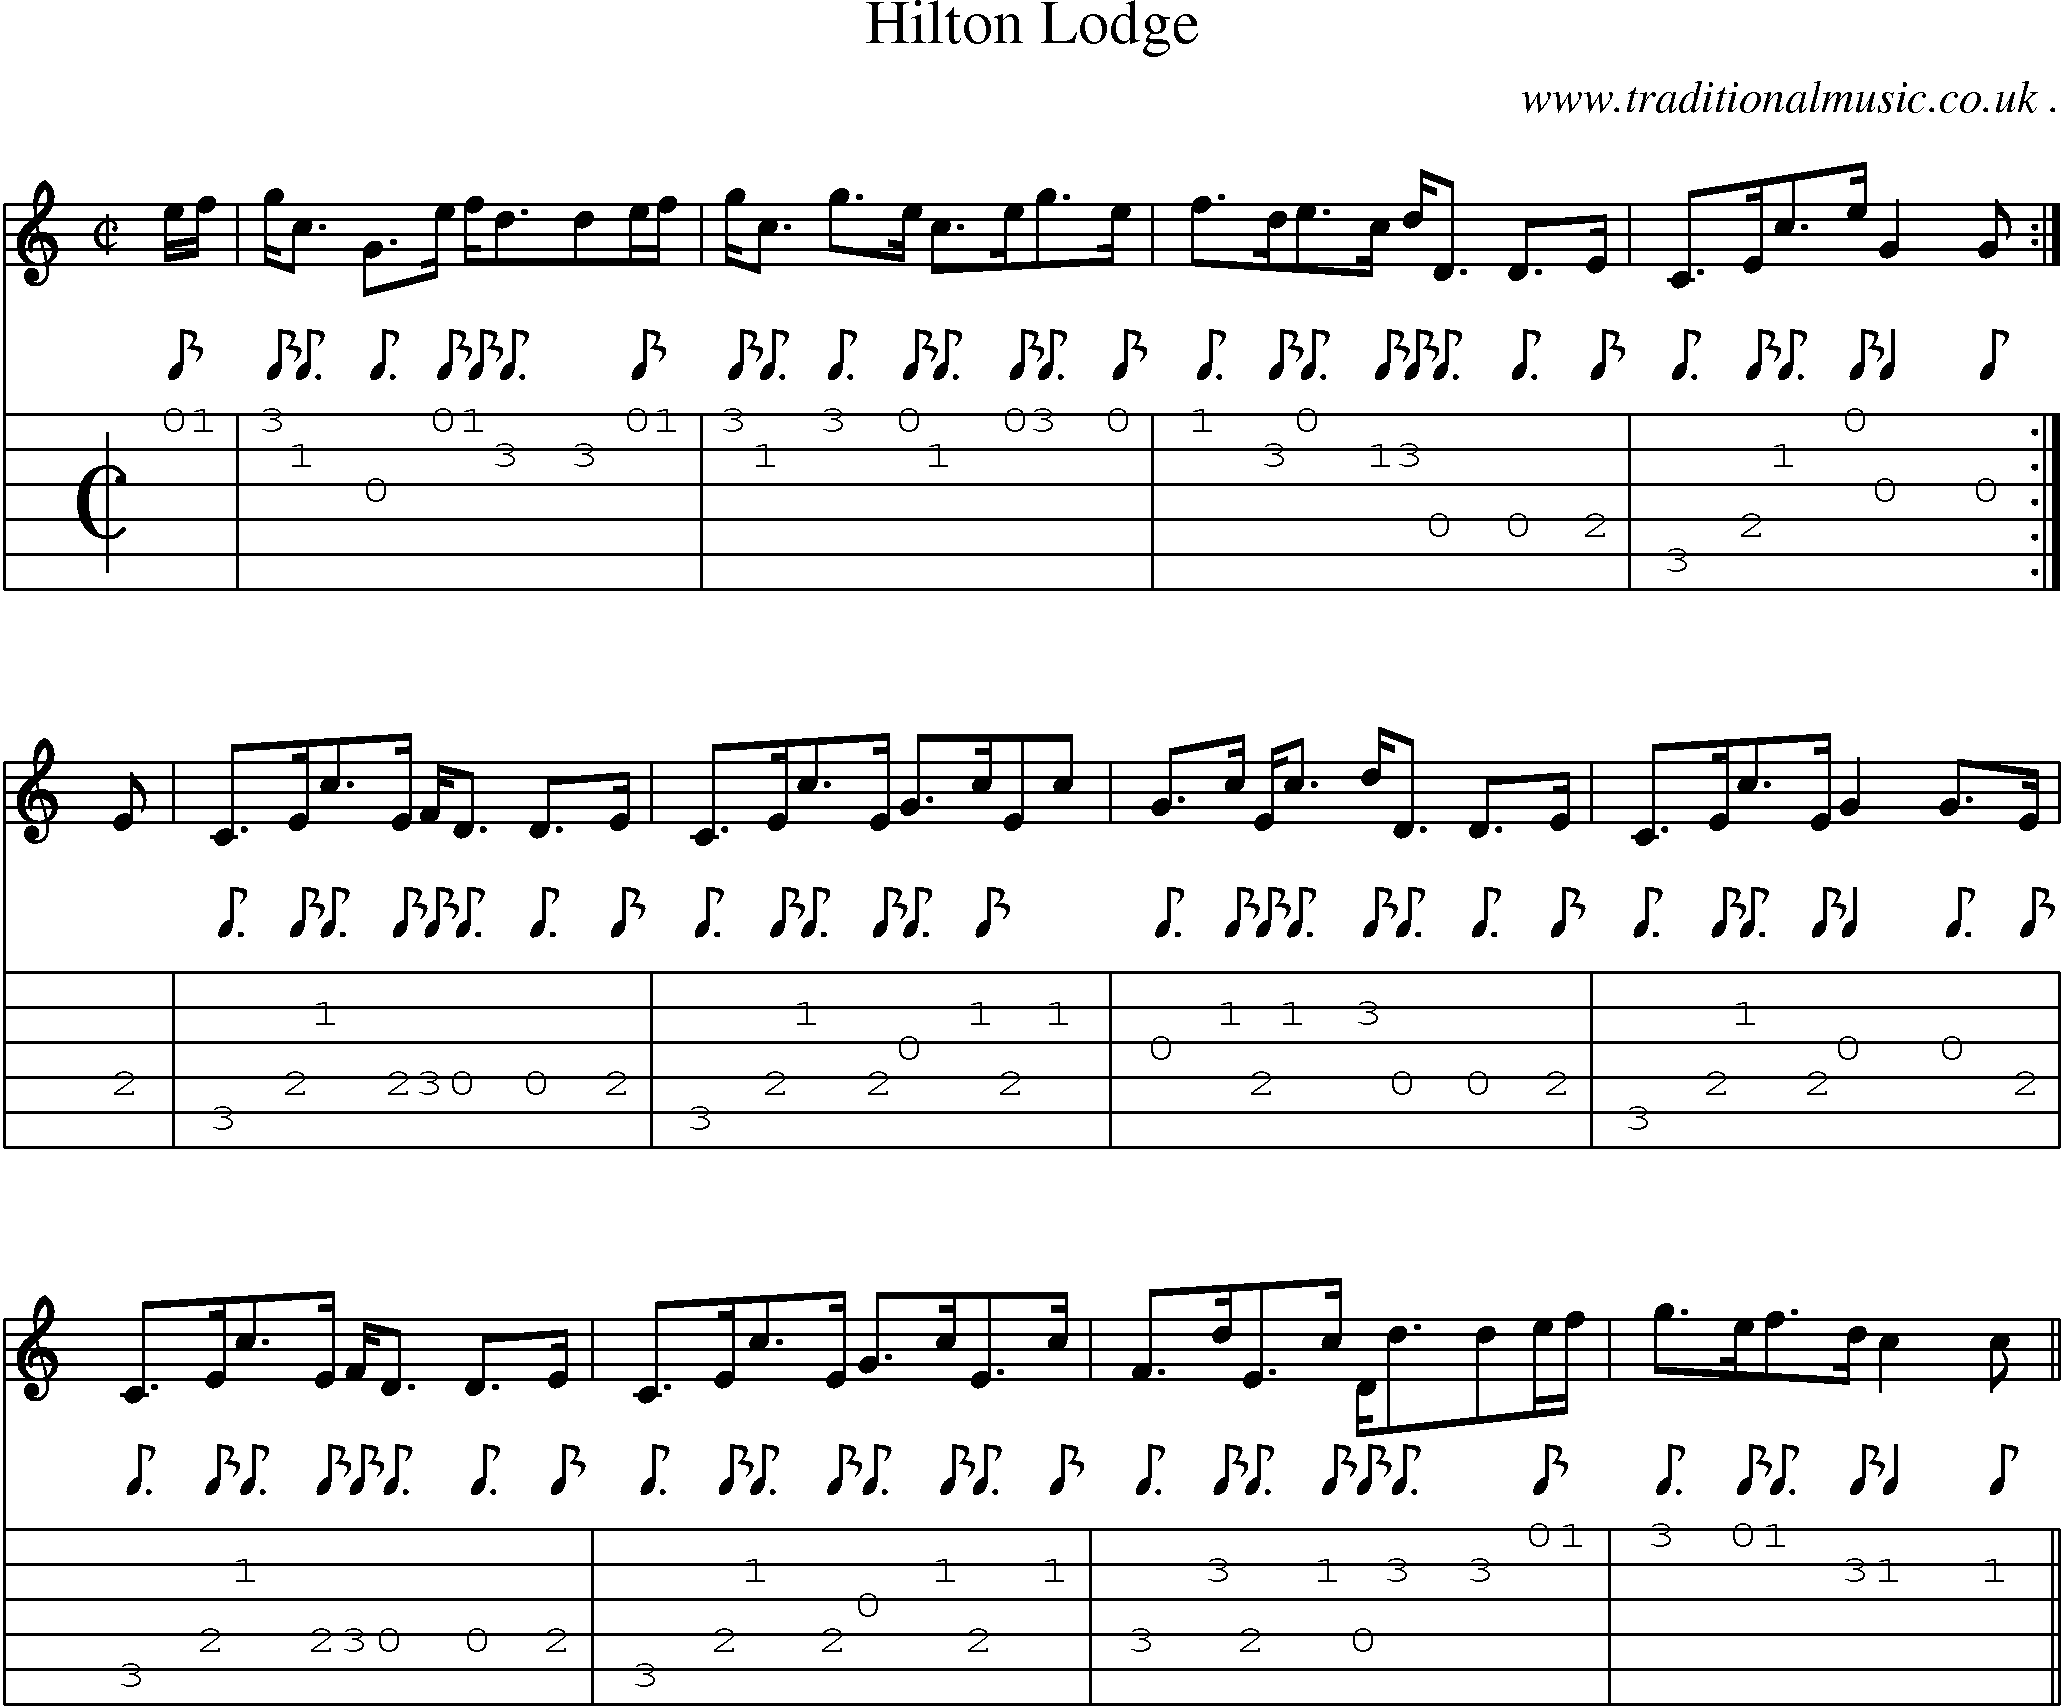 Sheet-music  score, Chords and Guitar Tabs for Hilton Lodge